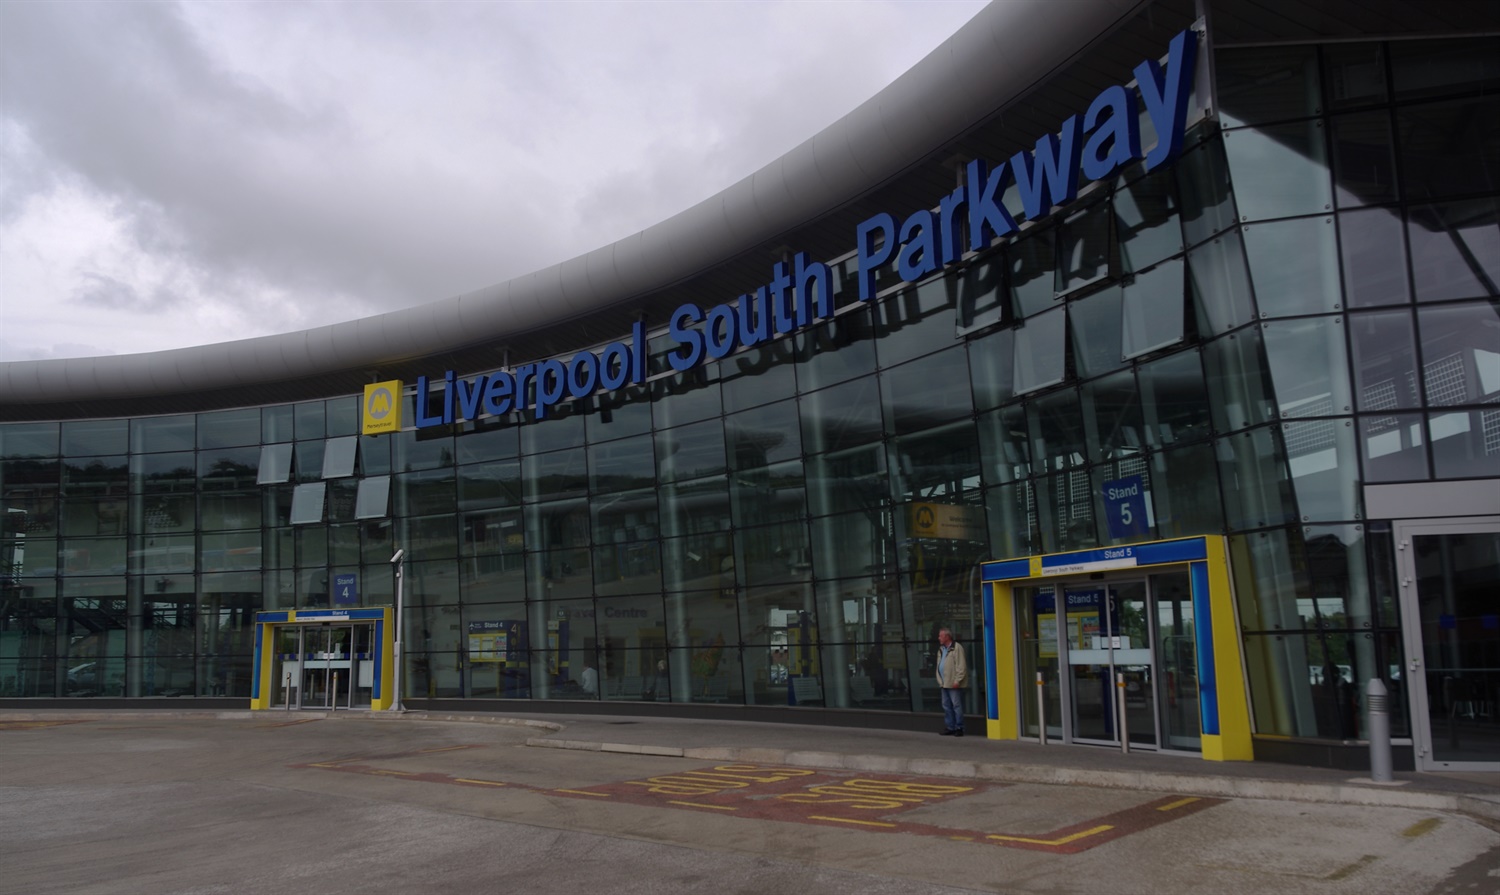 Liverpool South Parkway railway station